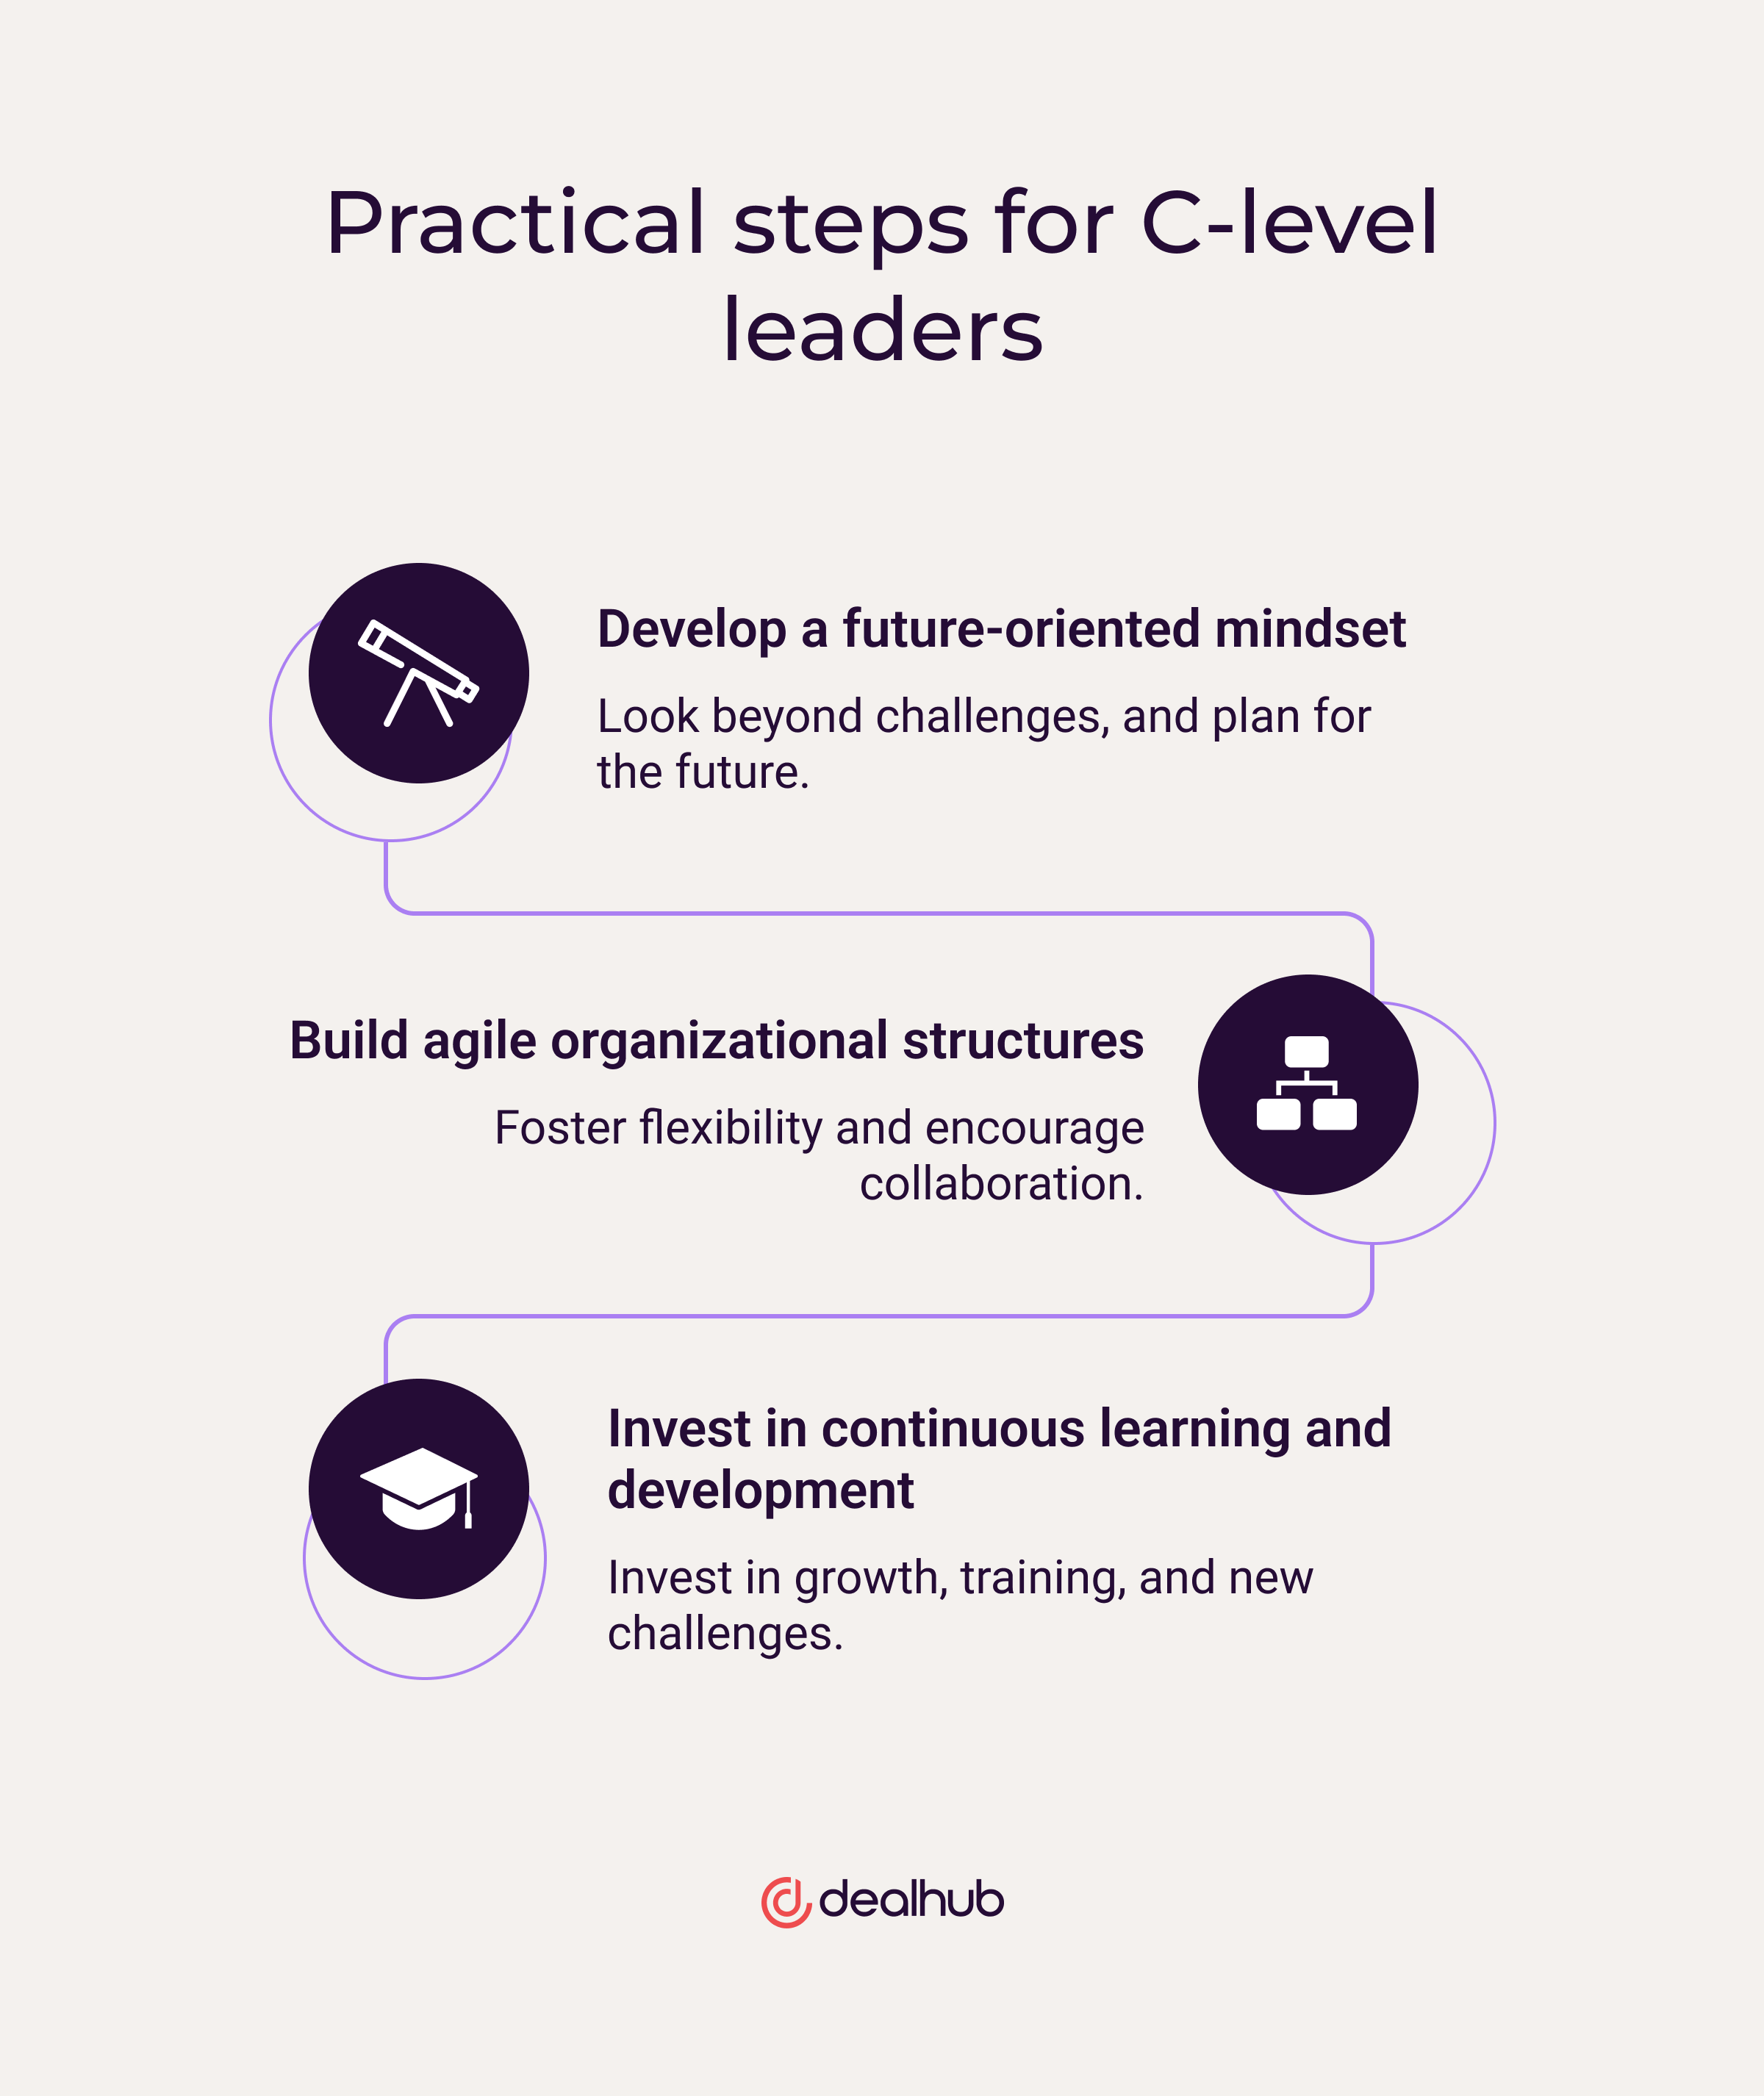 Practical steps for C-level leaders